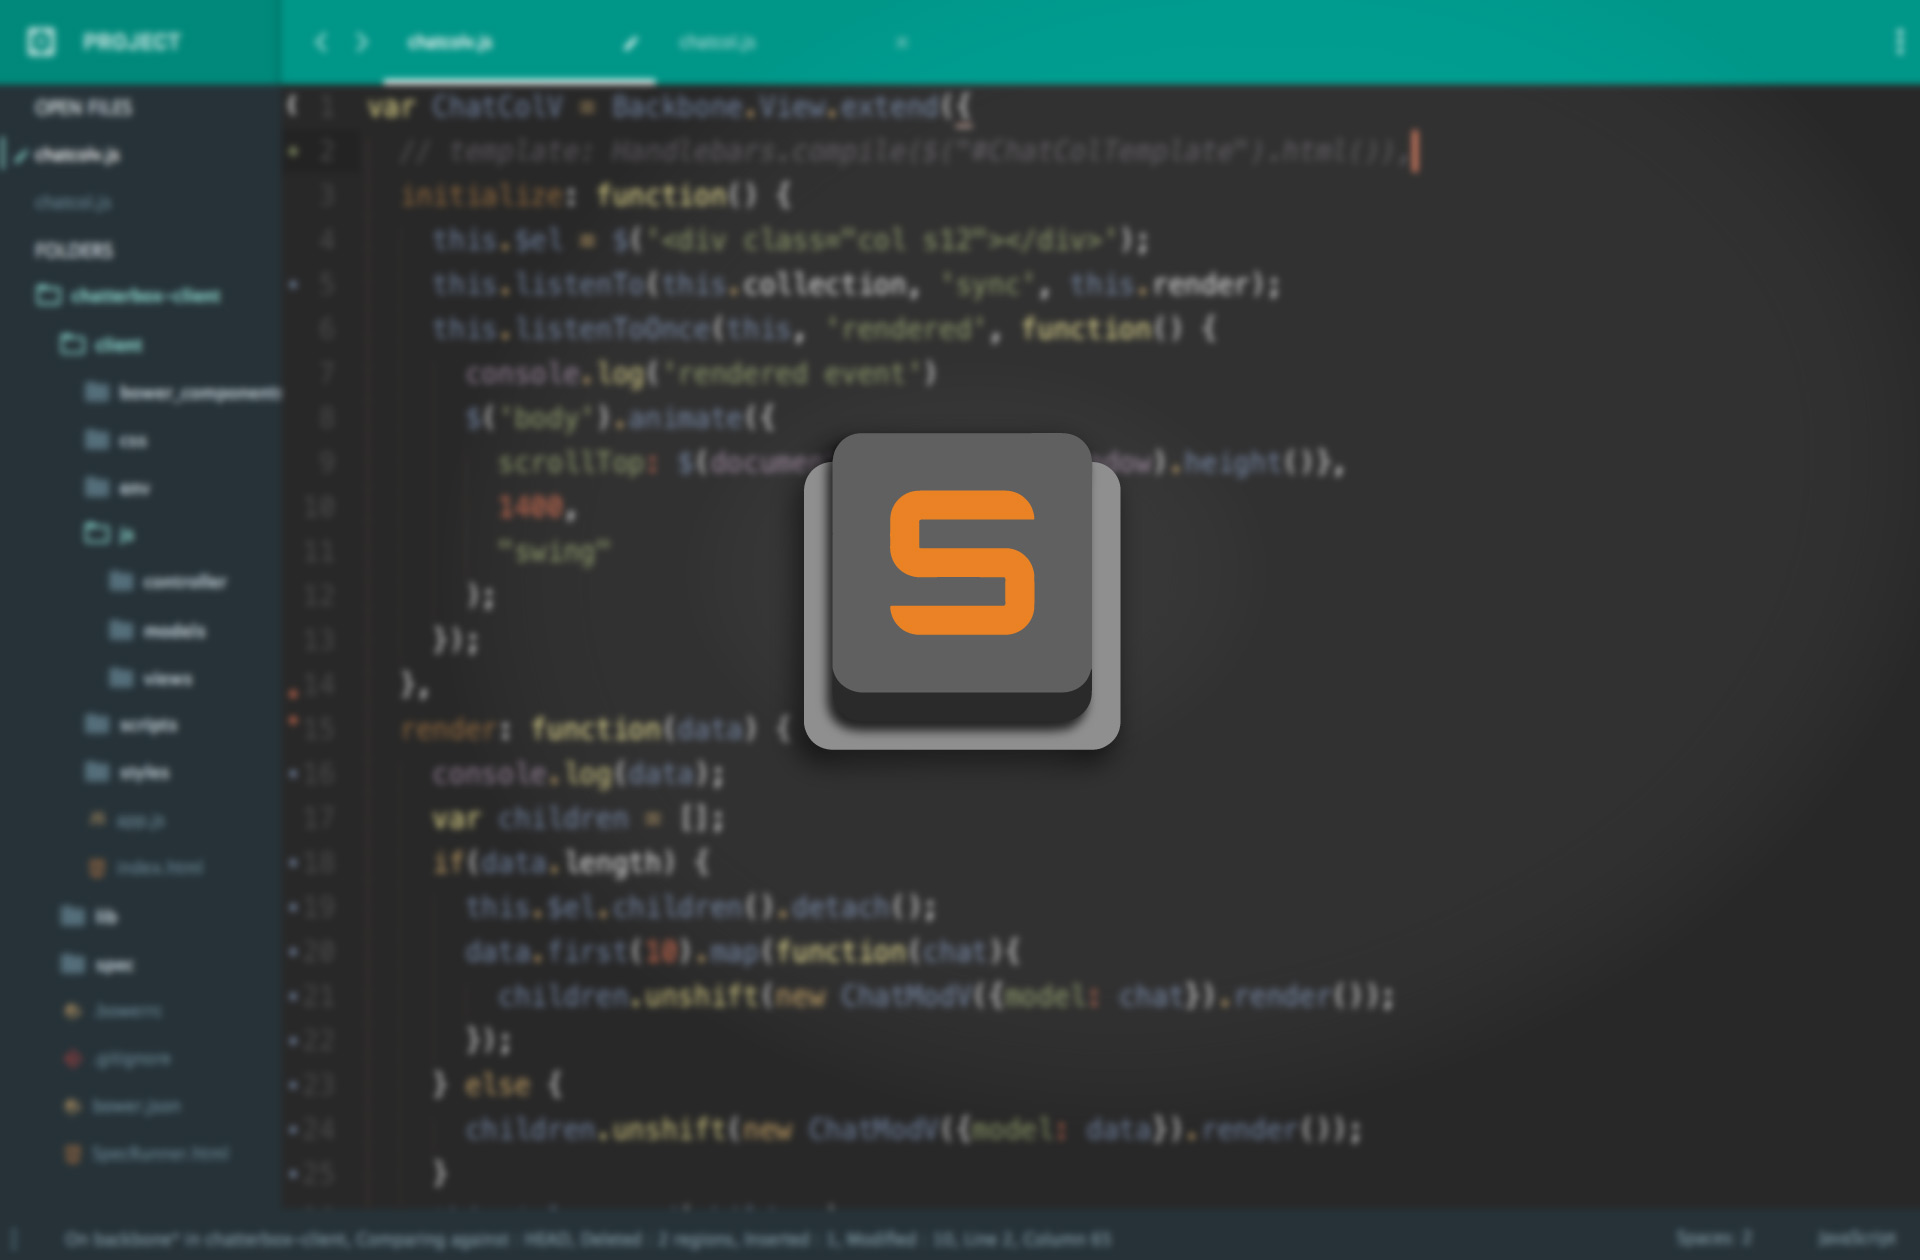 sublime text workflow